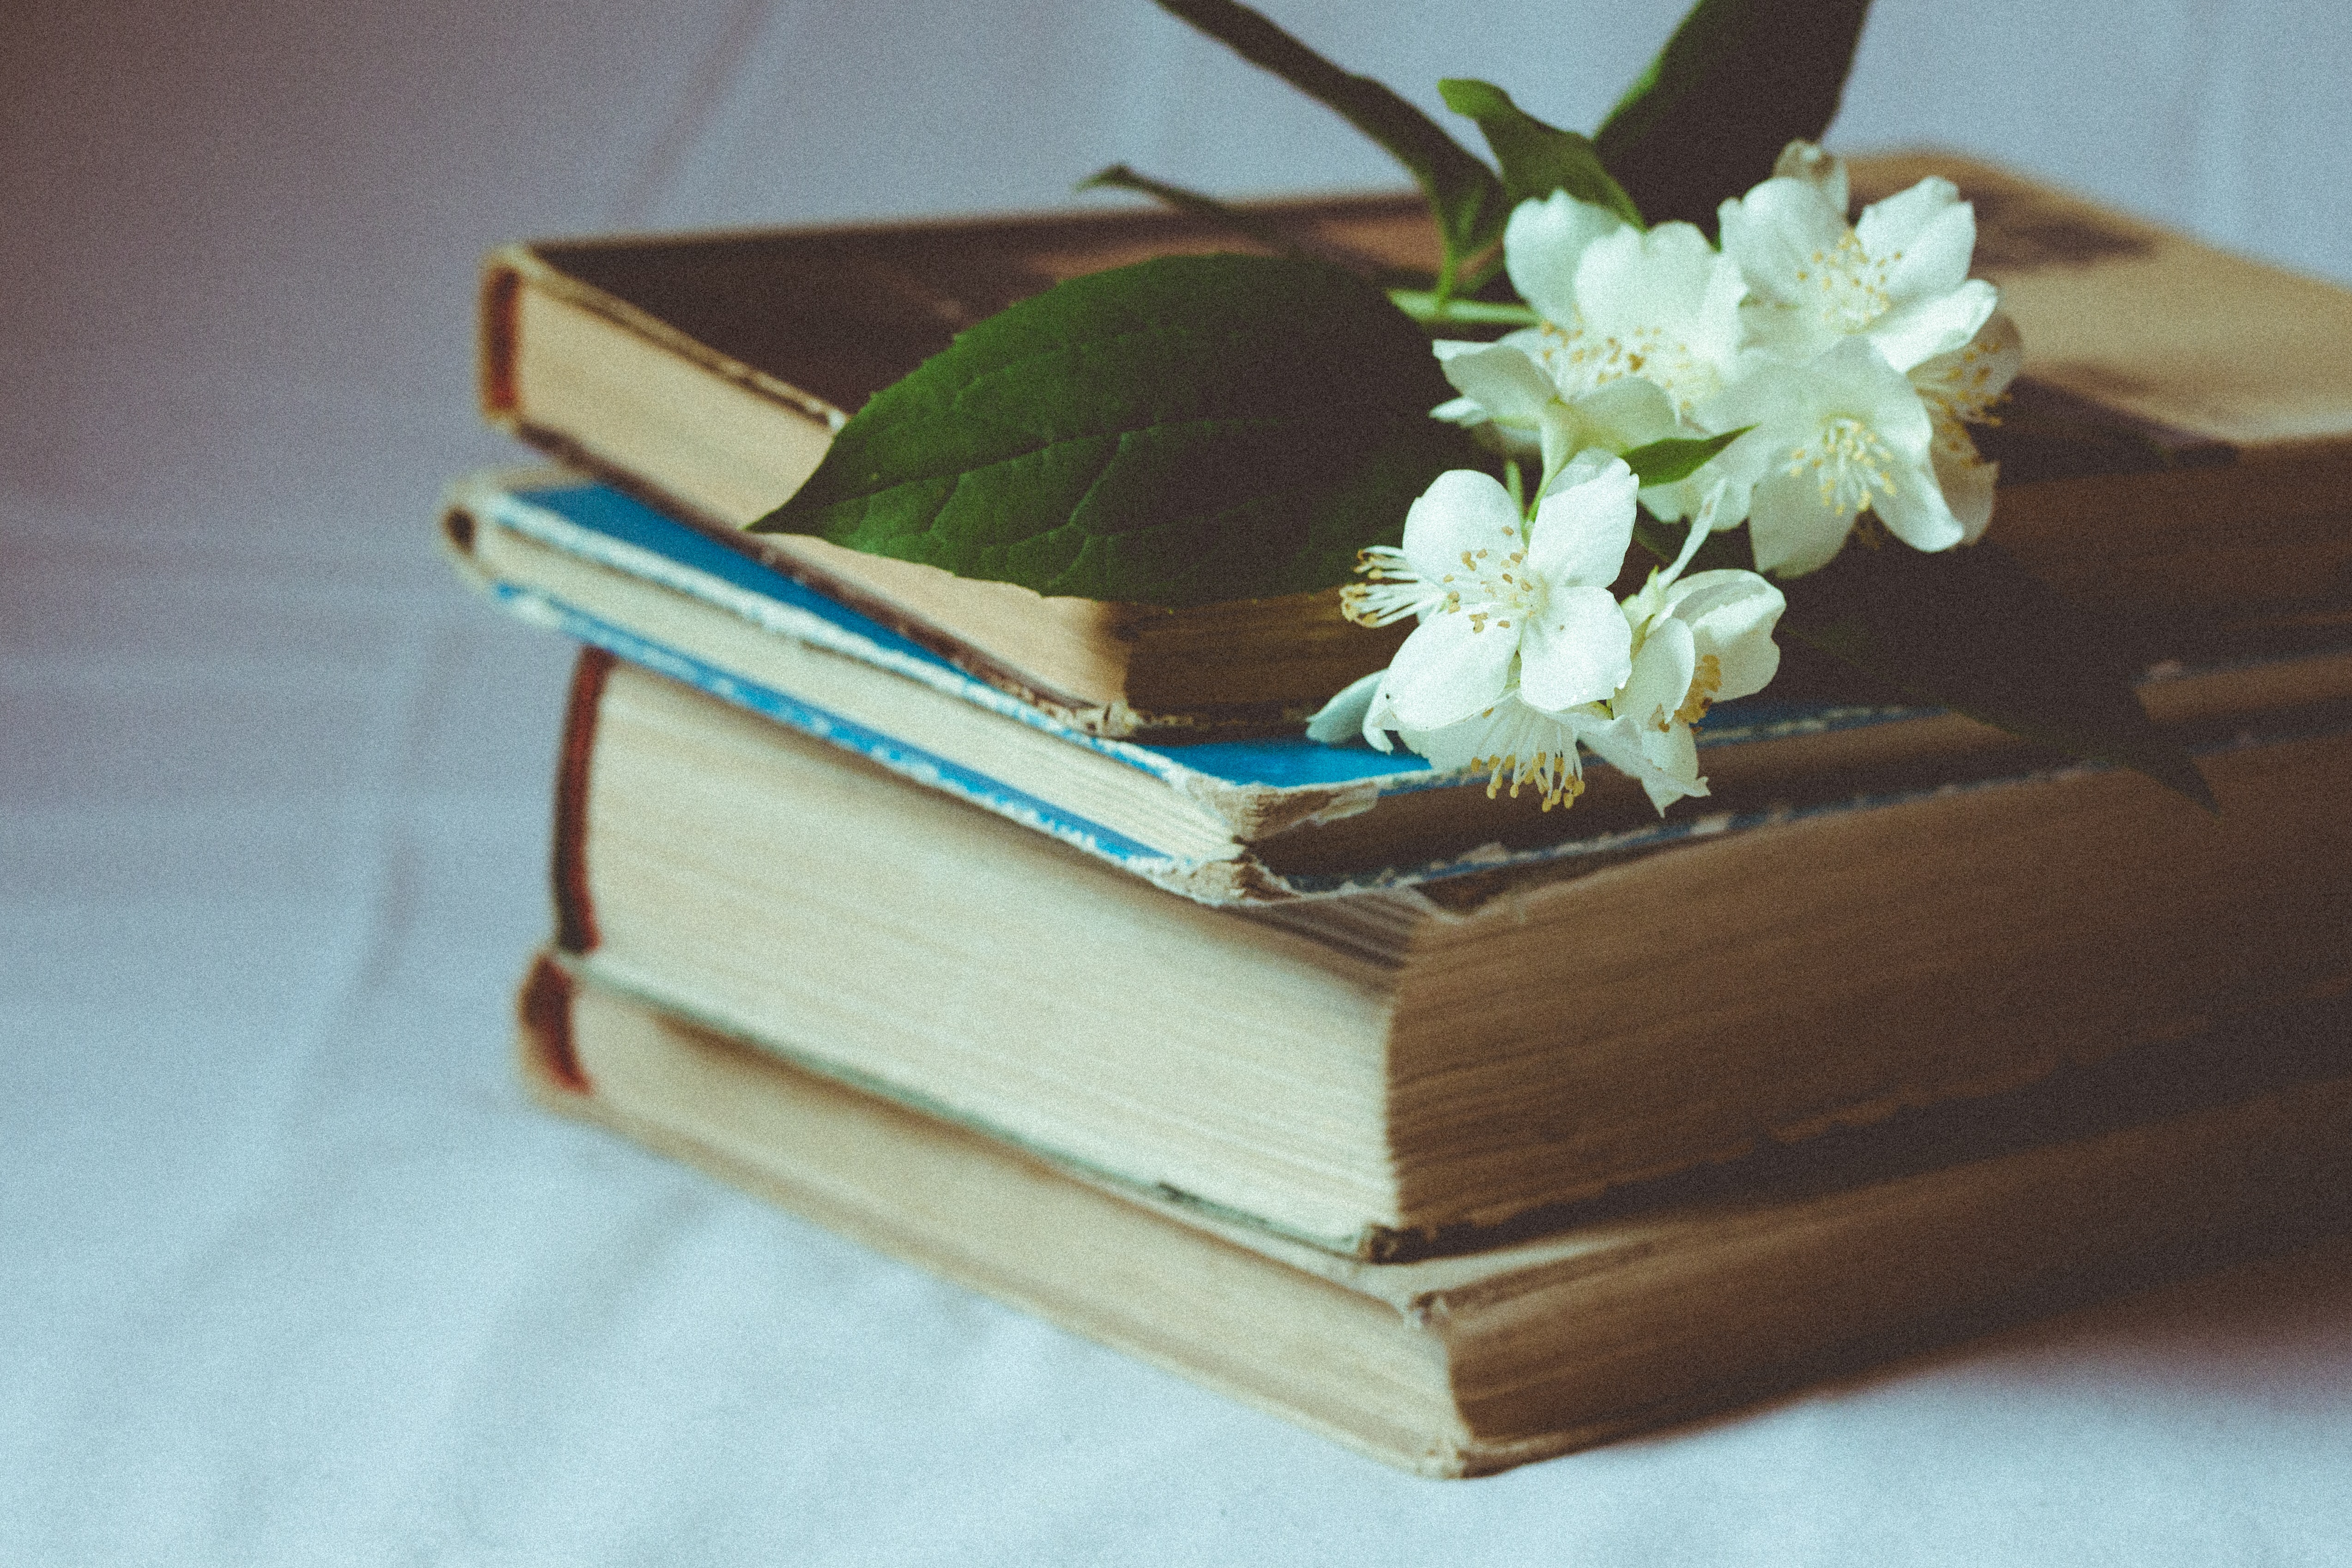 Several books stacked on top of each other and white flowers sitting on top.